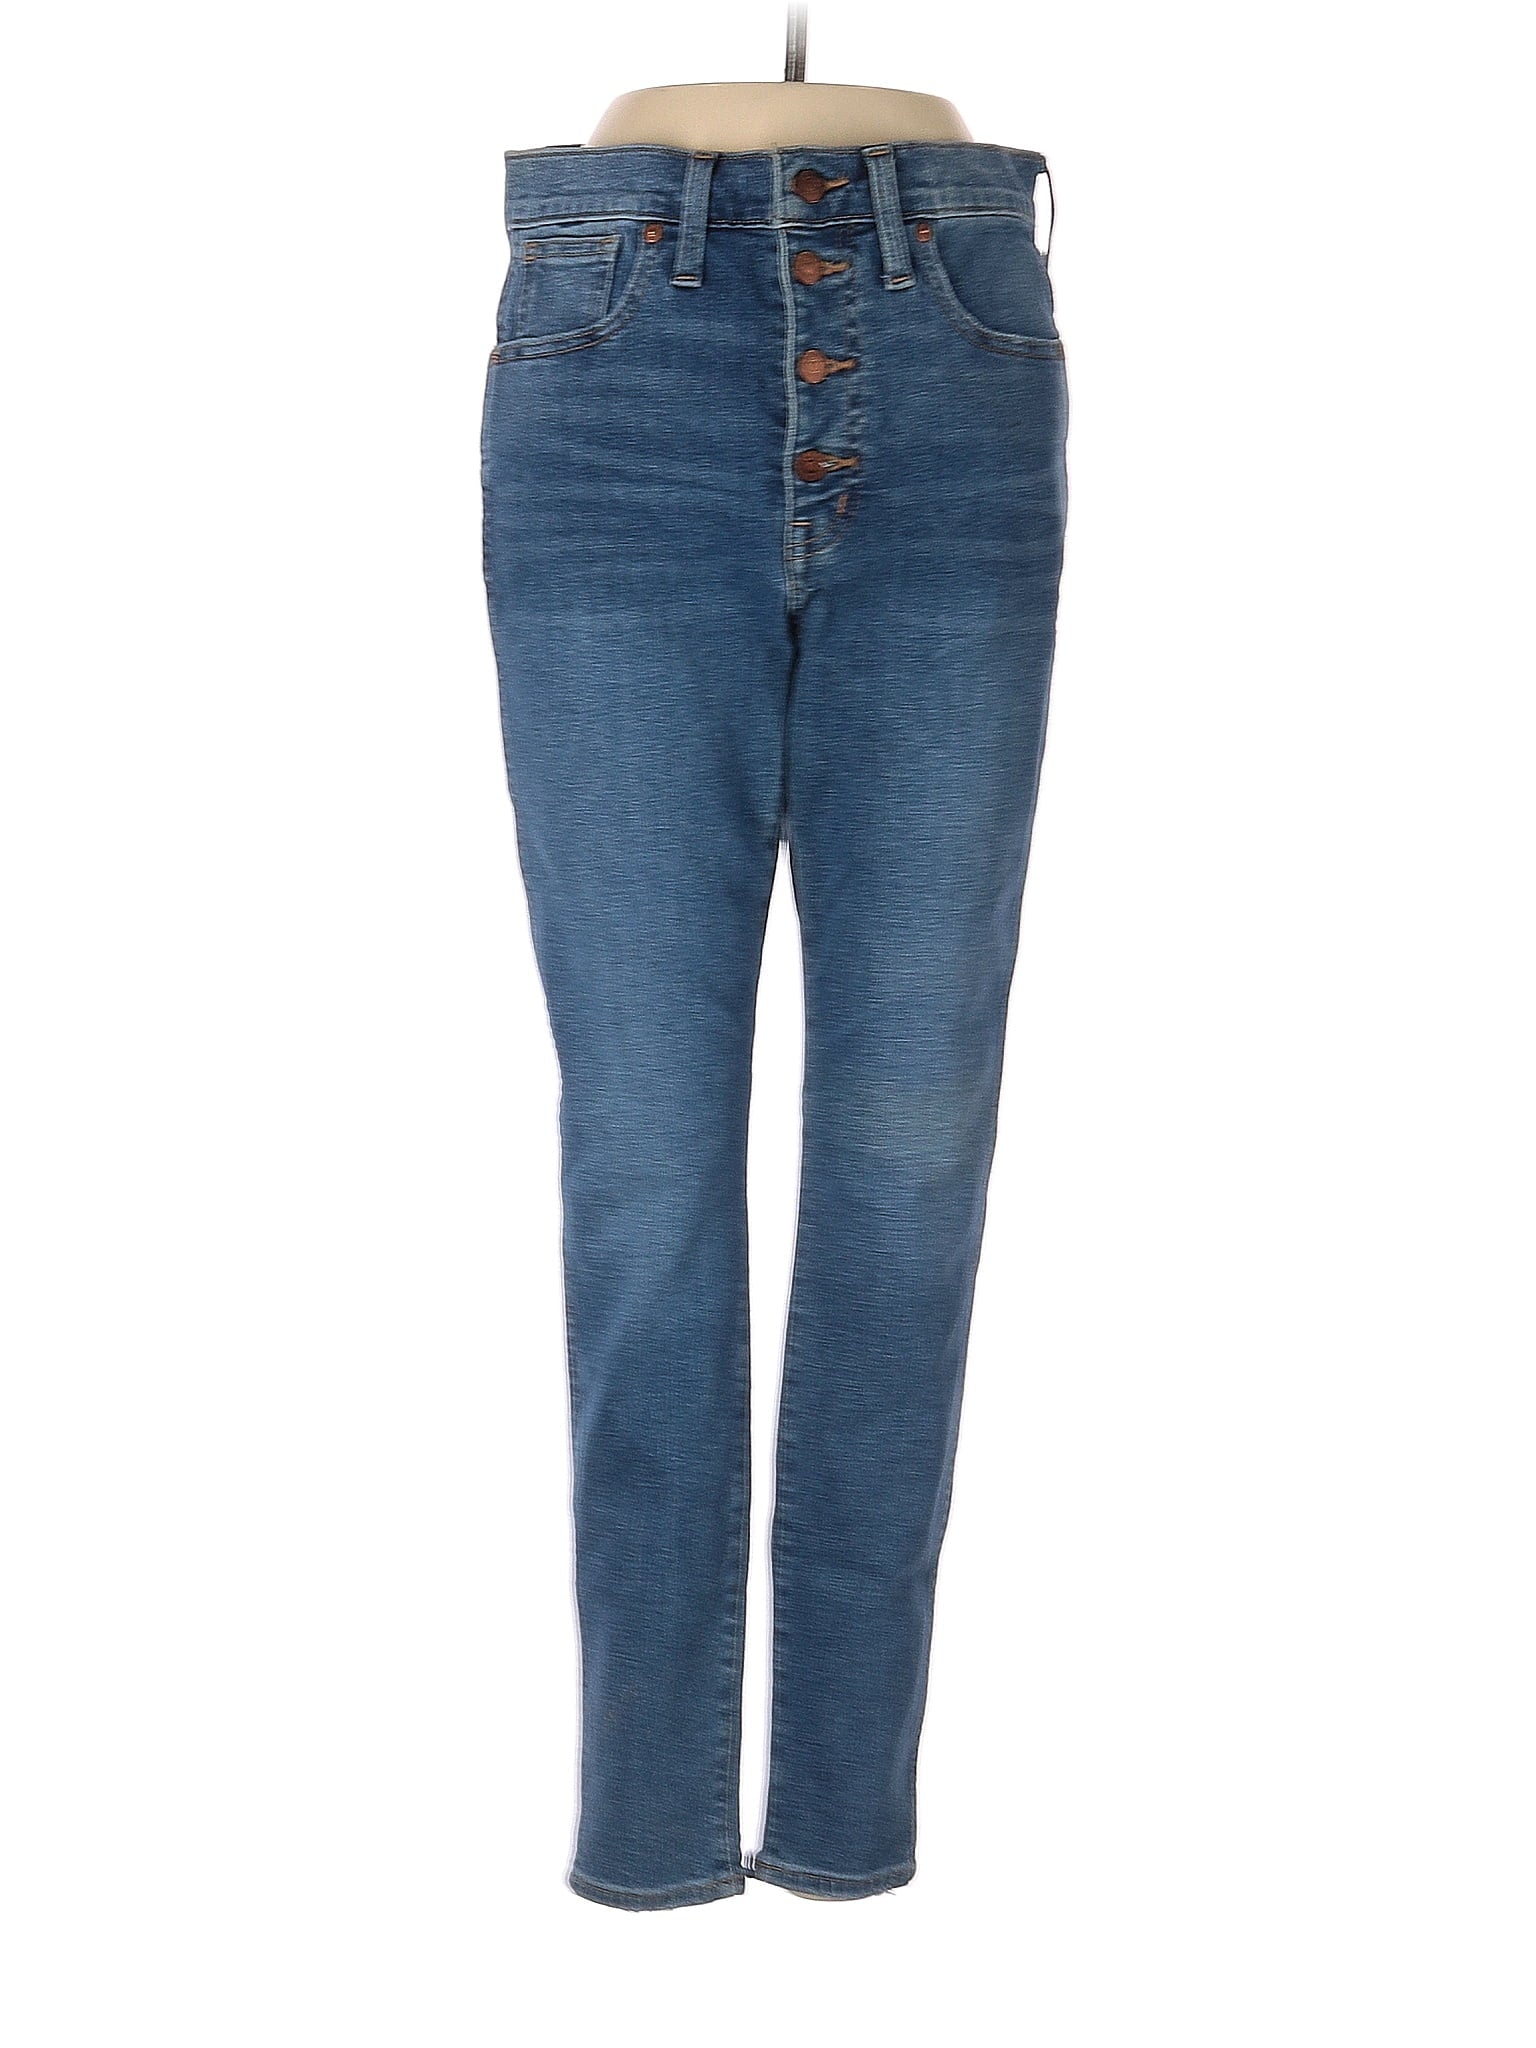 Mid-Rise Petite 10" High-Rise Skinny Jeans In Dewitt Wash: Button-Front TENCEL&trade; Denim Edition waist size - 28 P